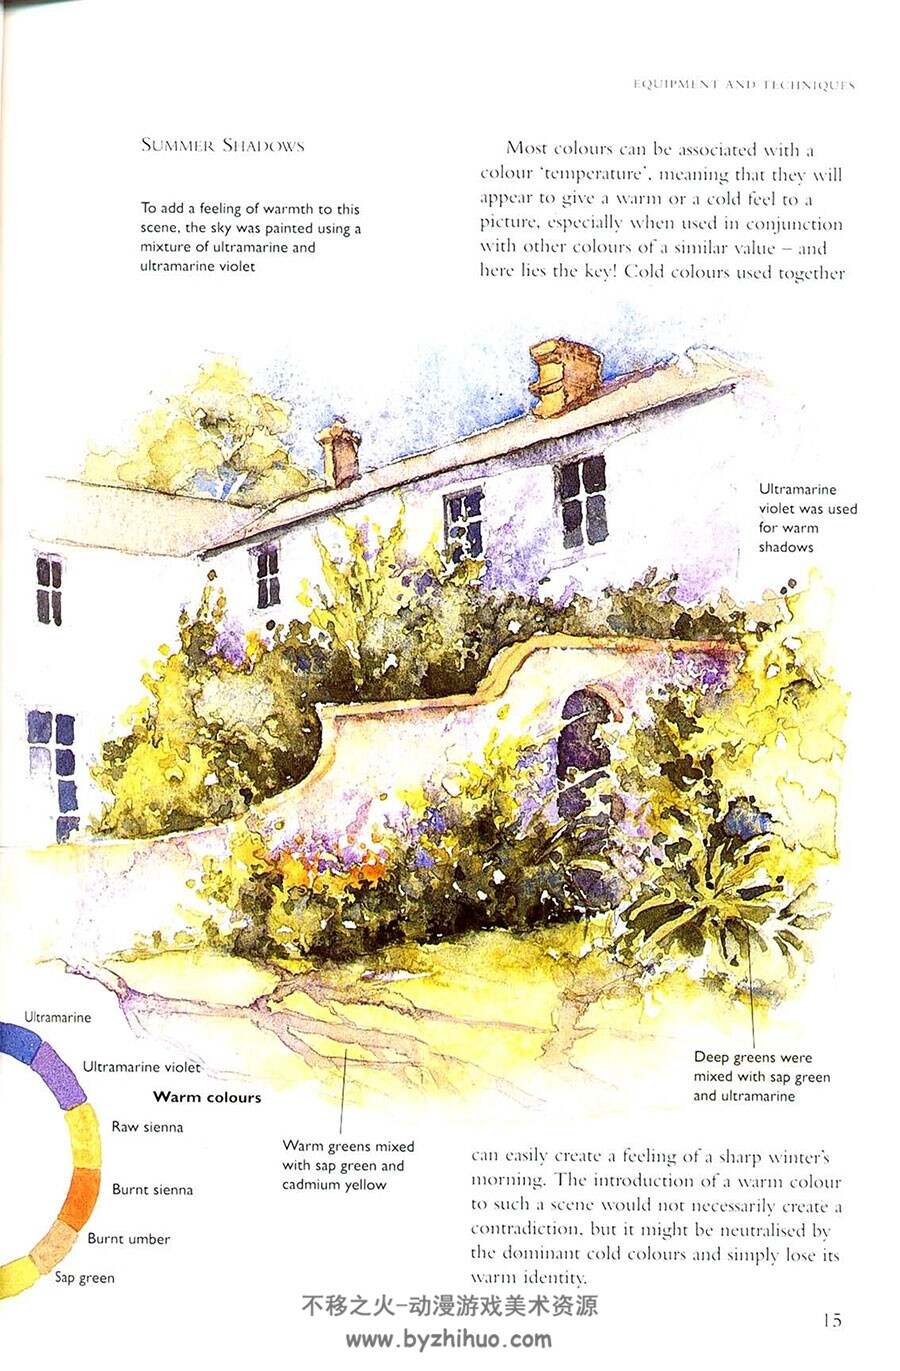 The Watercolourist's Guide to painting Buildings 水彩画师画建筑指南下载